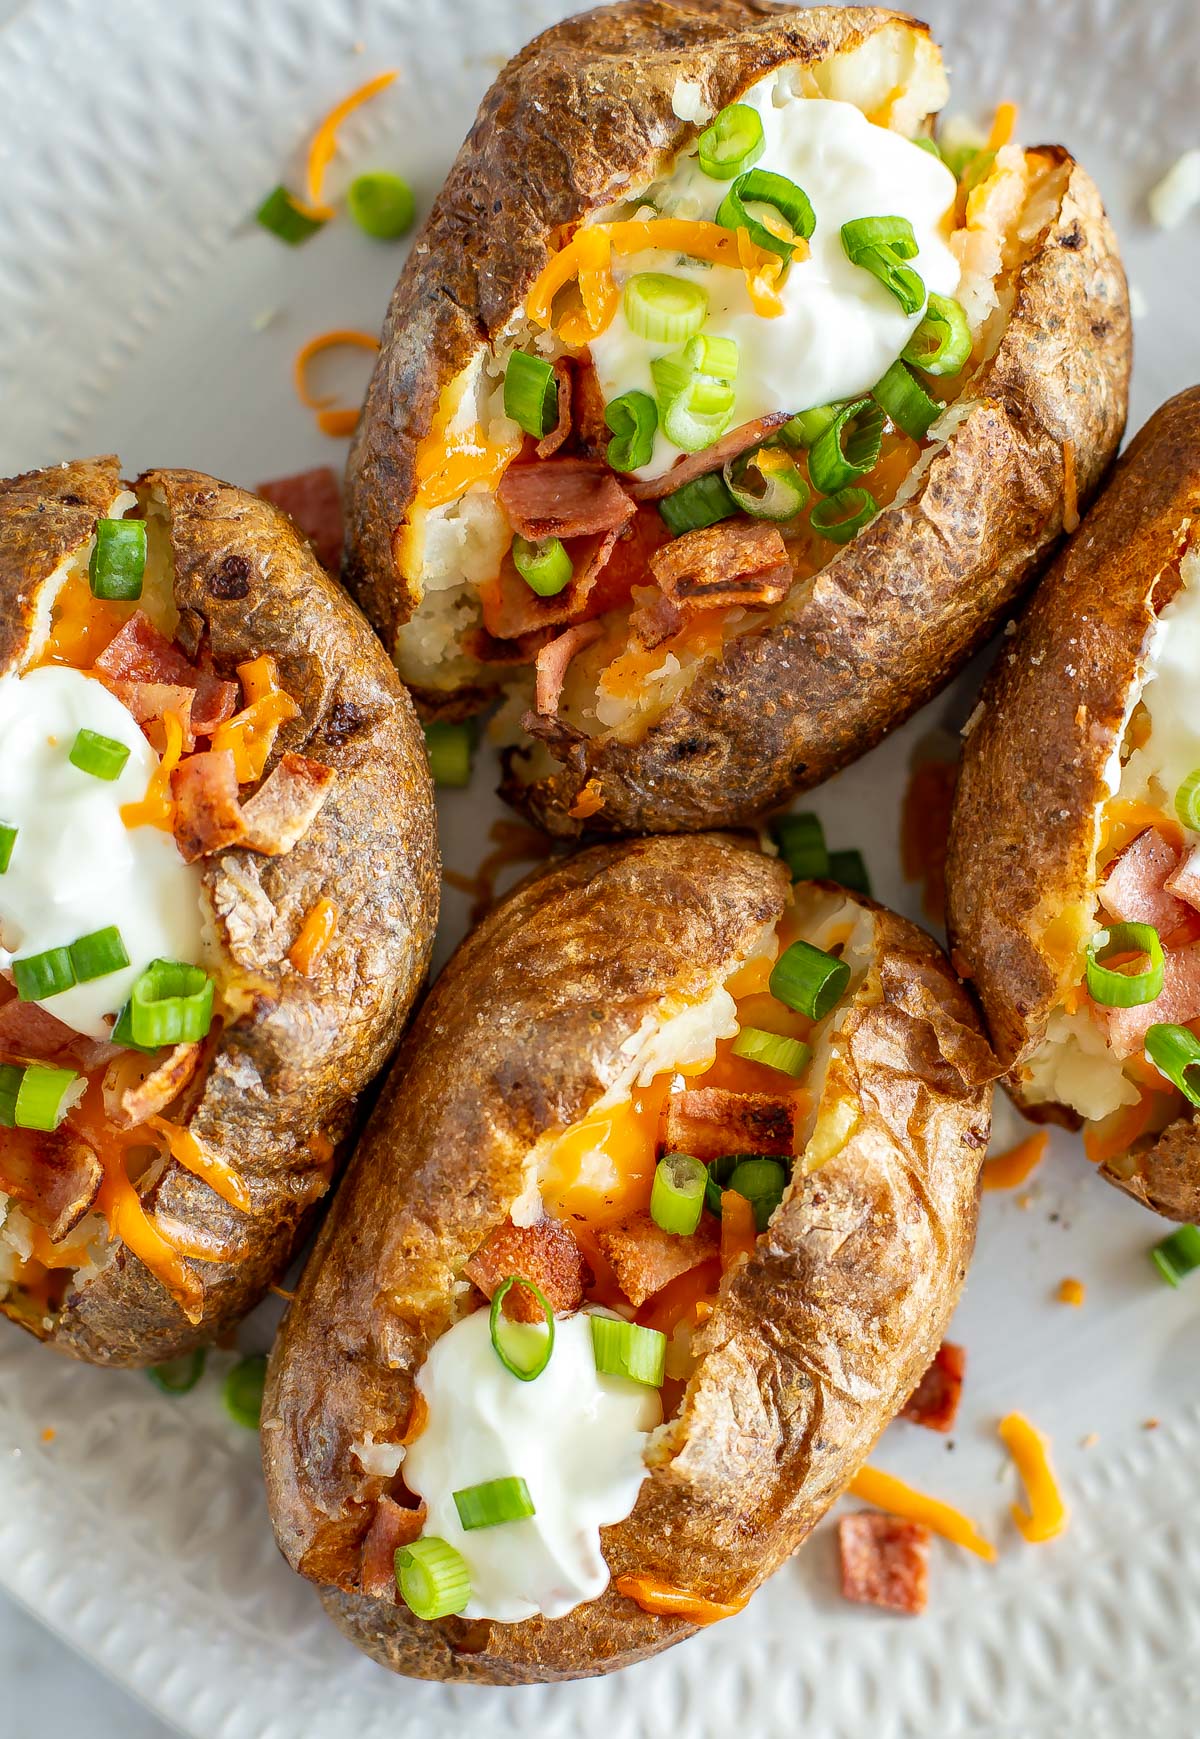 A close-up of four air fryer baked potatoes on a plate loaded with bacon, cheese, green onions, and sour cream.